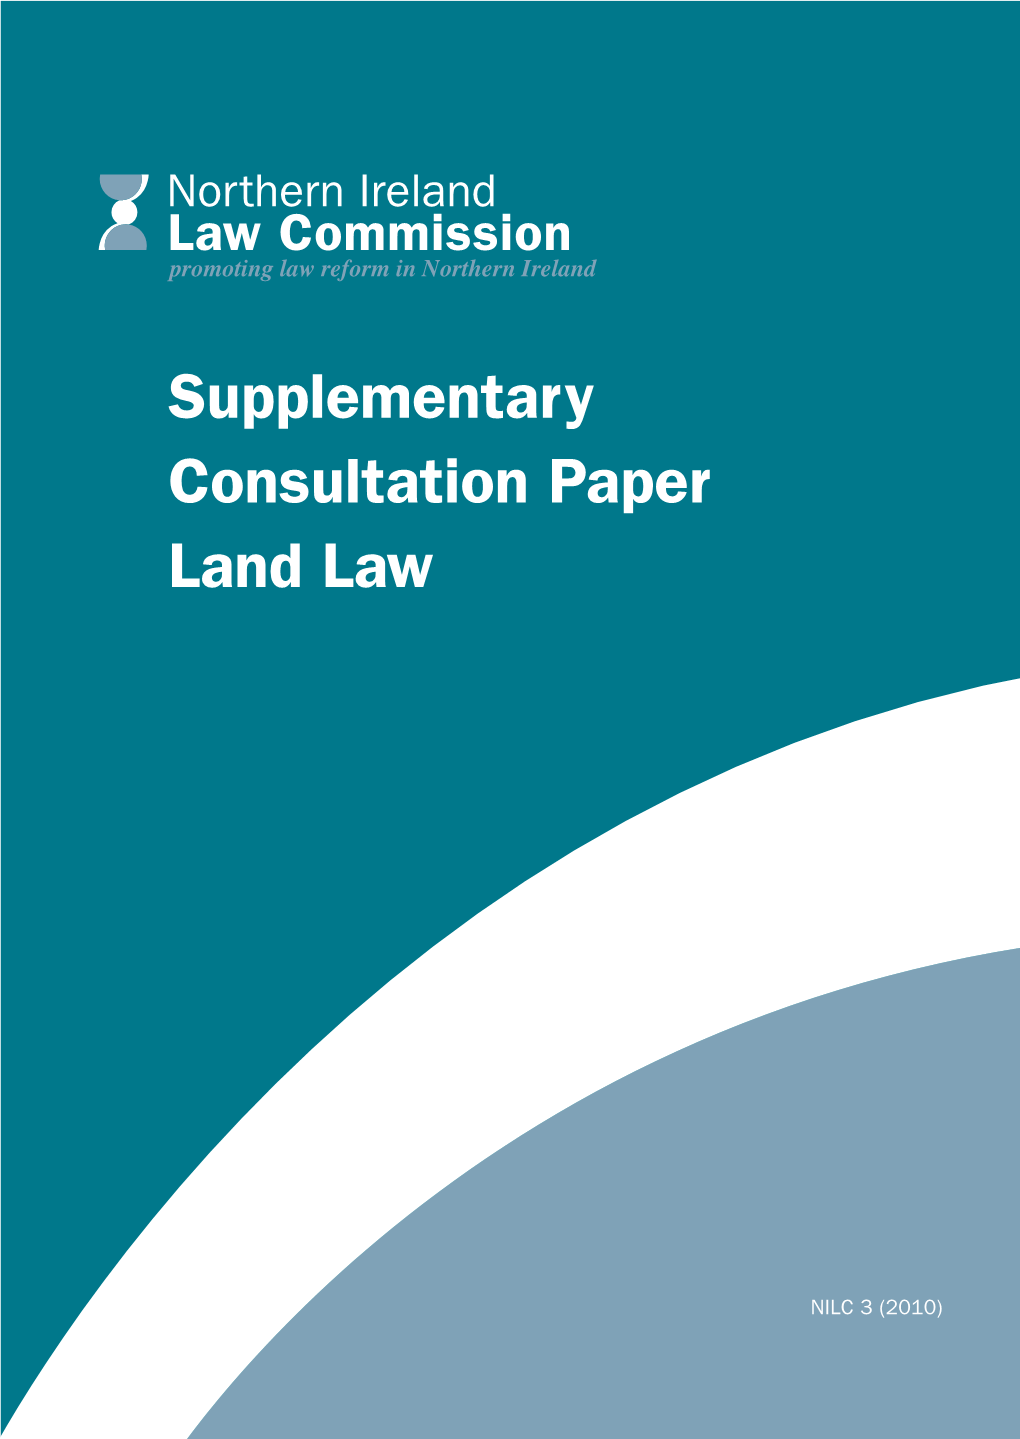 Supplementary Consultation Paper Land Law NILC 3 (2010) (PDF